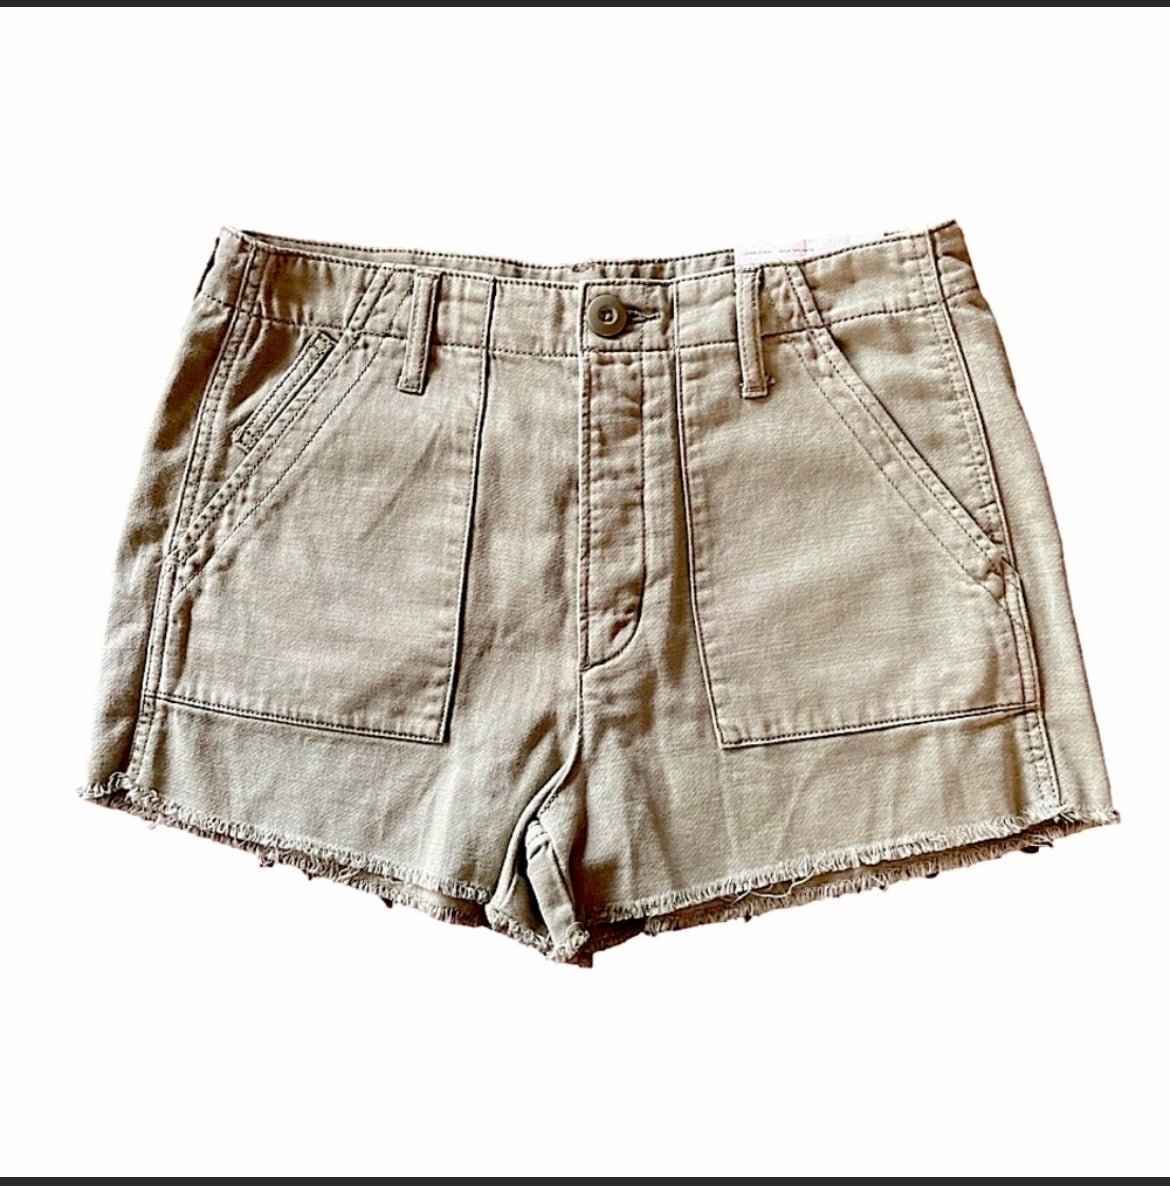 Buy American Eagle Women’s shorts NWT GeAmNHr04 US Outlet